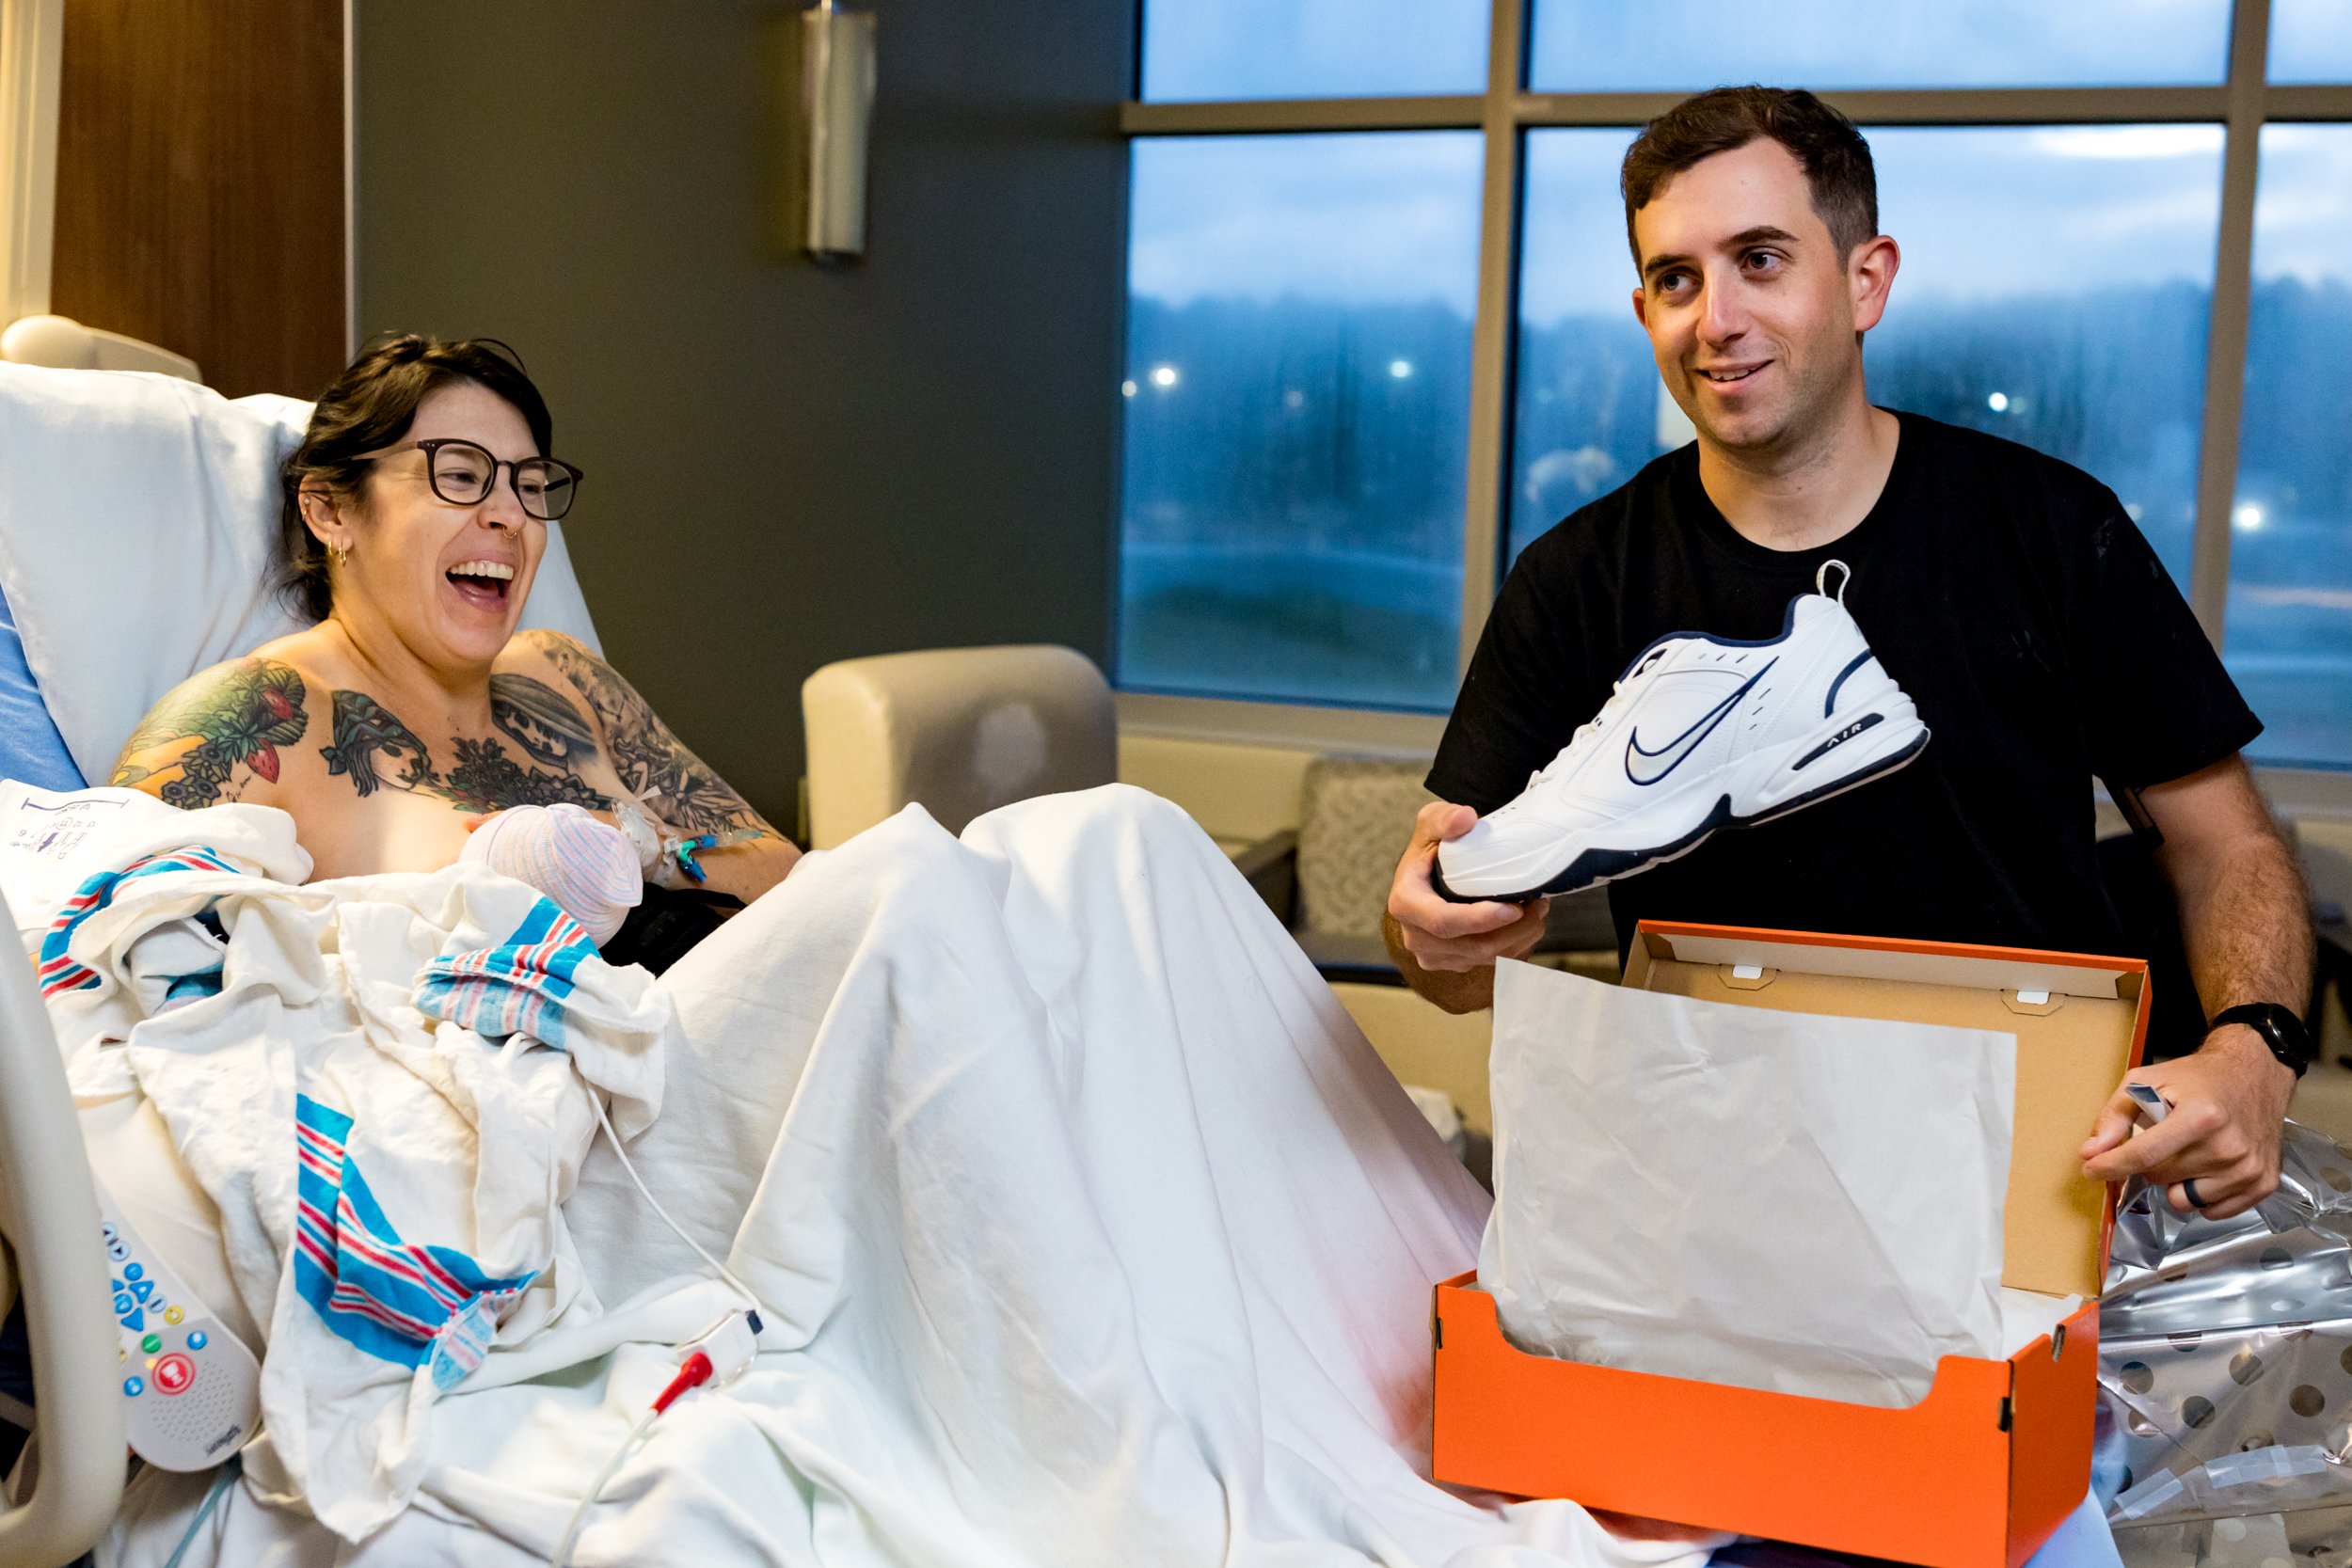 new dad receiving "dad shoes" in the hospital just after baby's birth